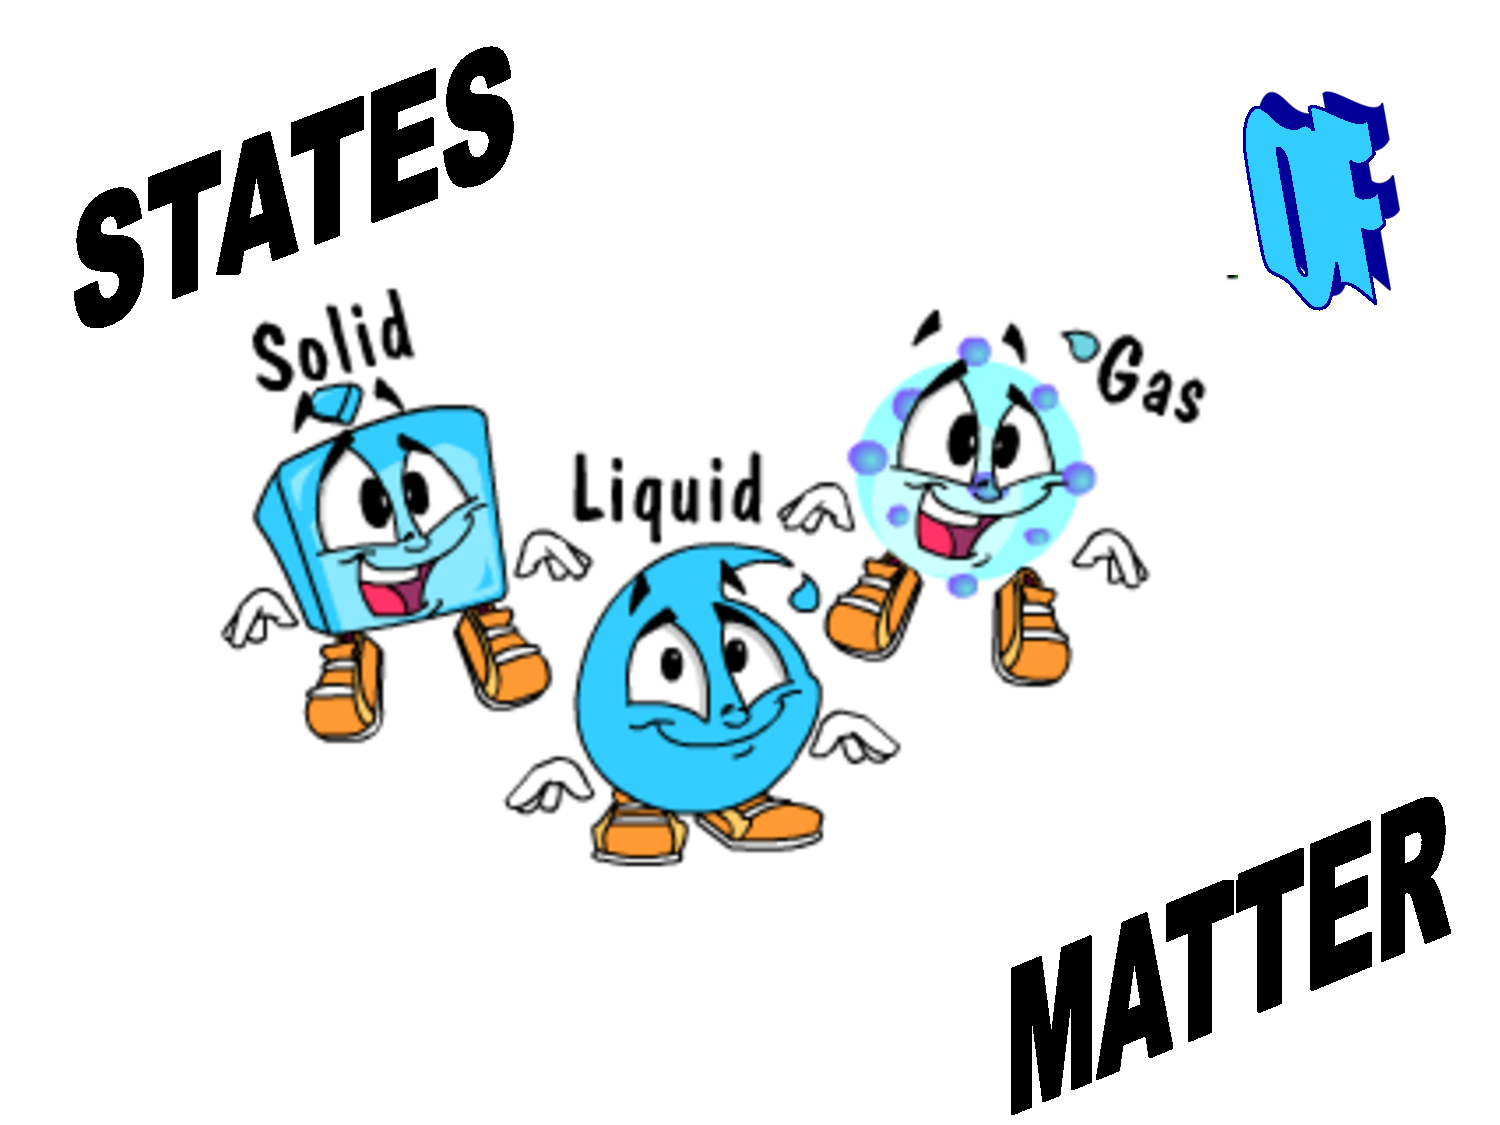 Solid Liquid Gas Png - Today We Learned About The Three States Of Matter! They Are Solid, Liquid, And Gas. We Also Learned About The Molecule Arrangements Of The D., Transparent background PNG HD thumbnail